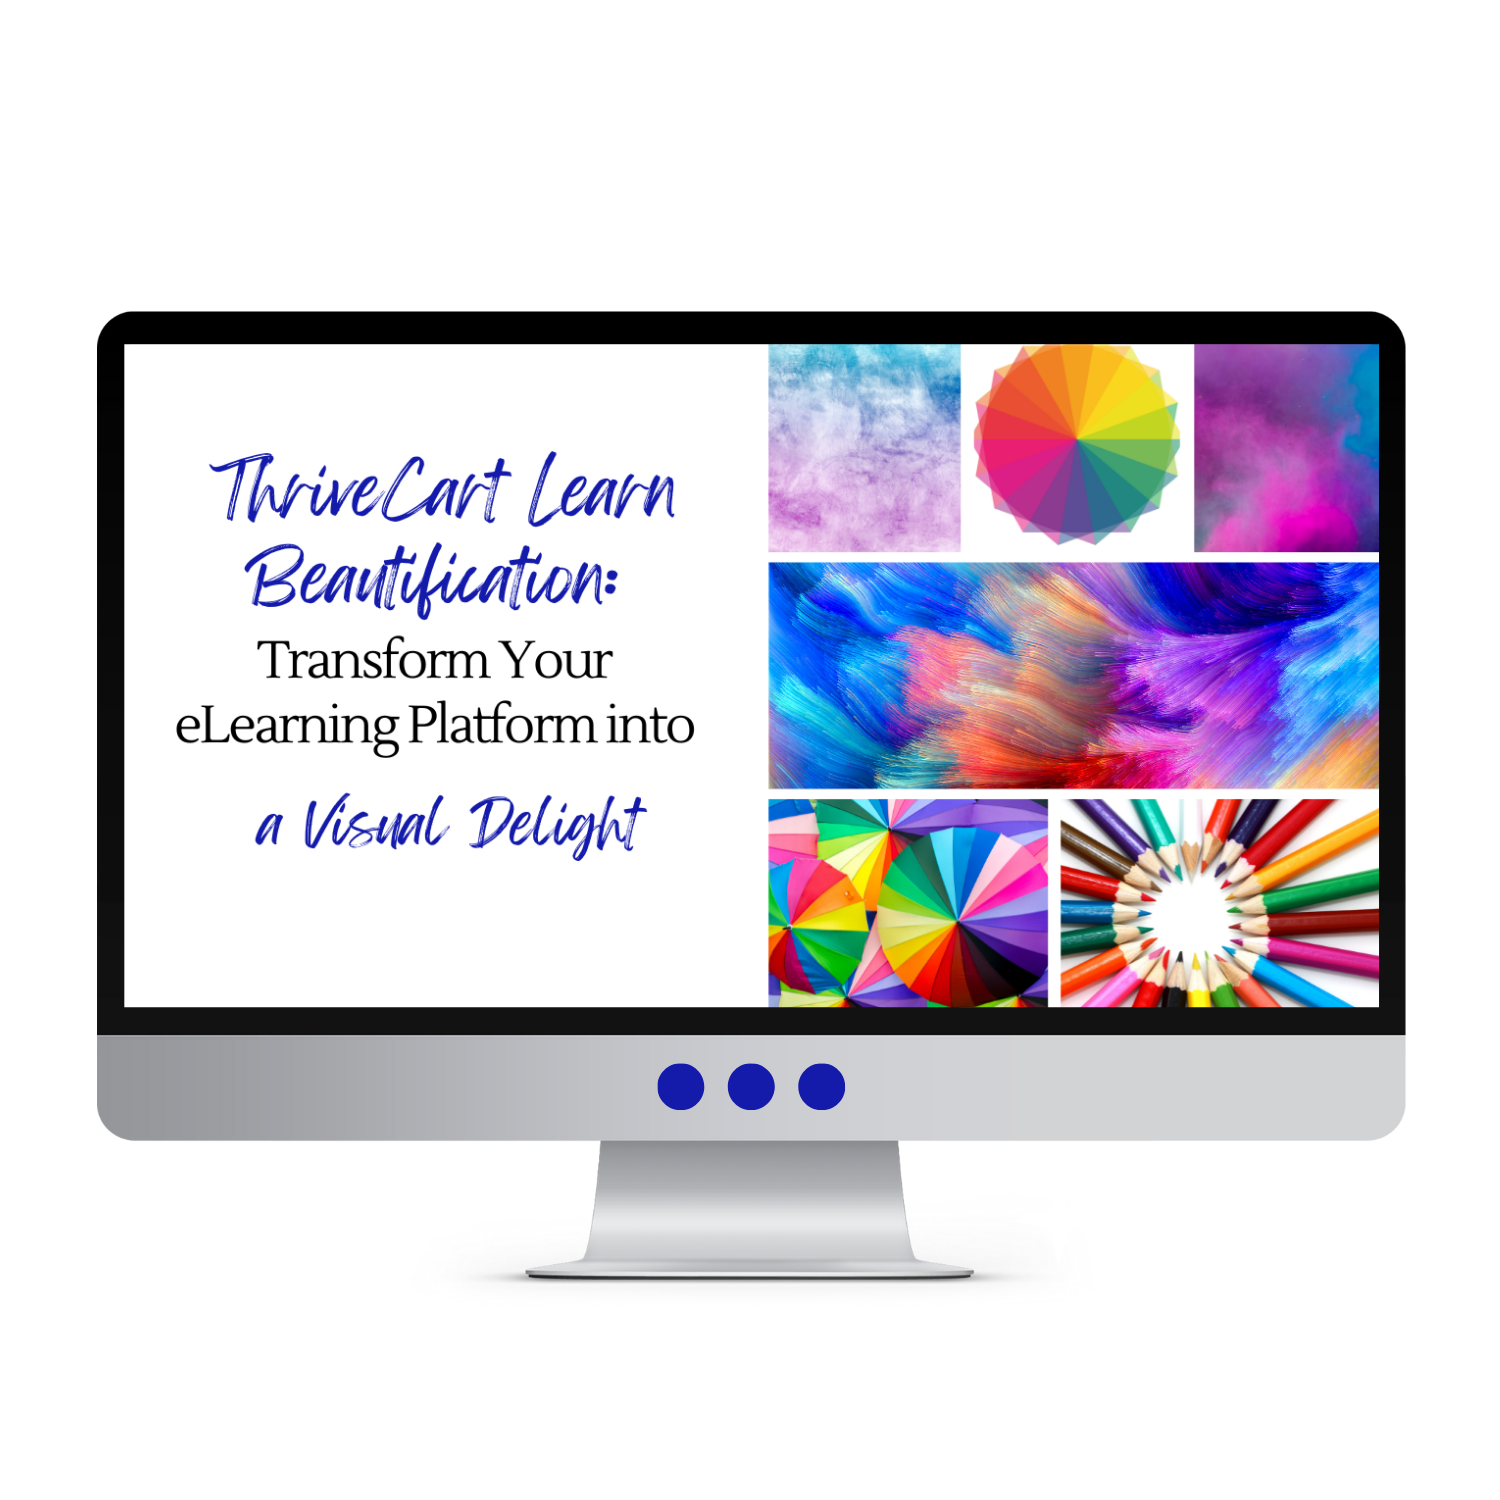 ThriveCart Learn Beautification